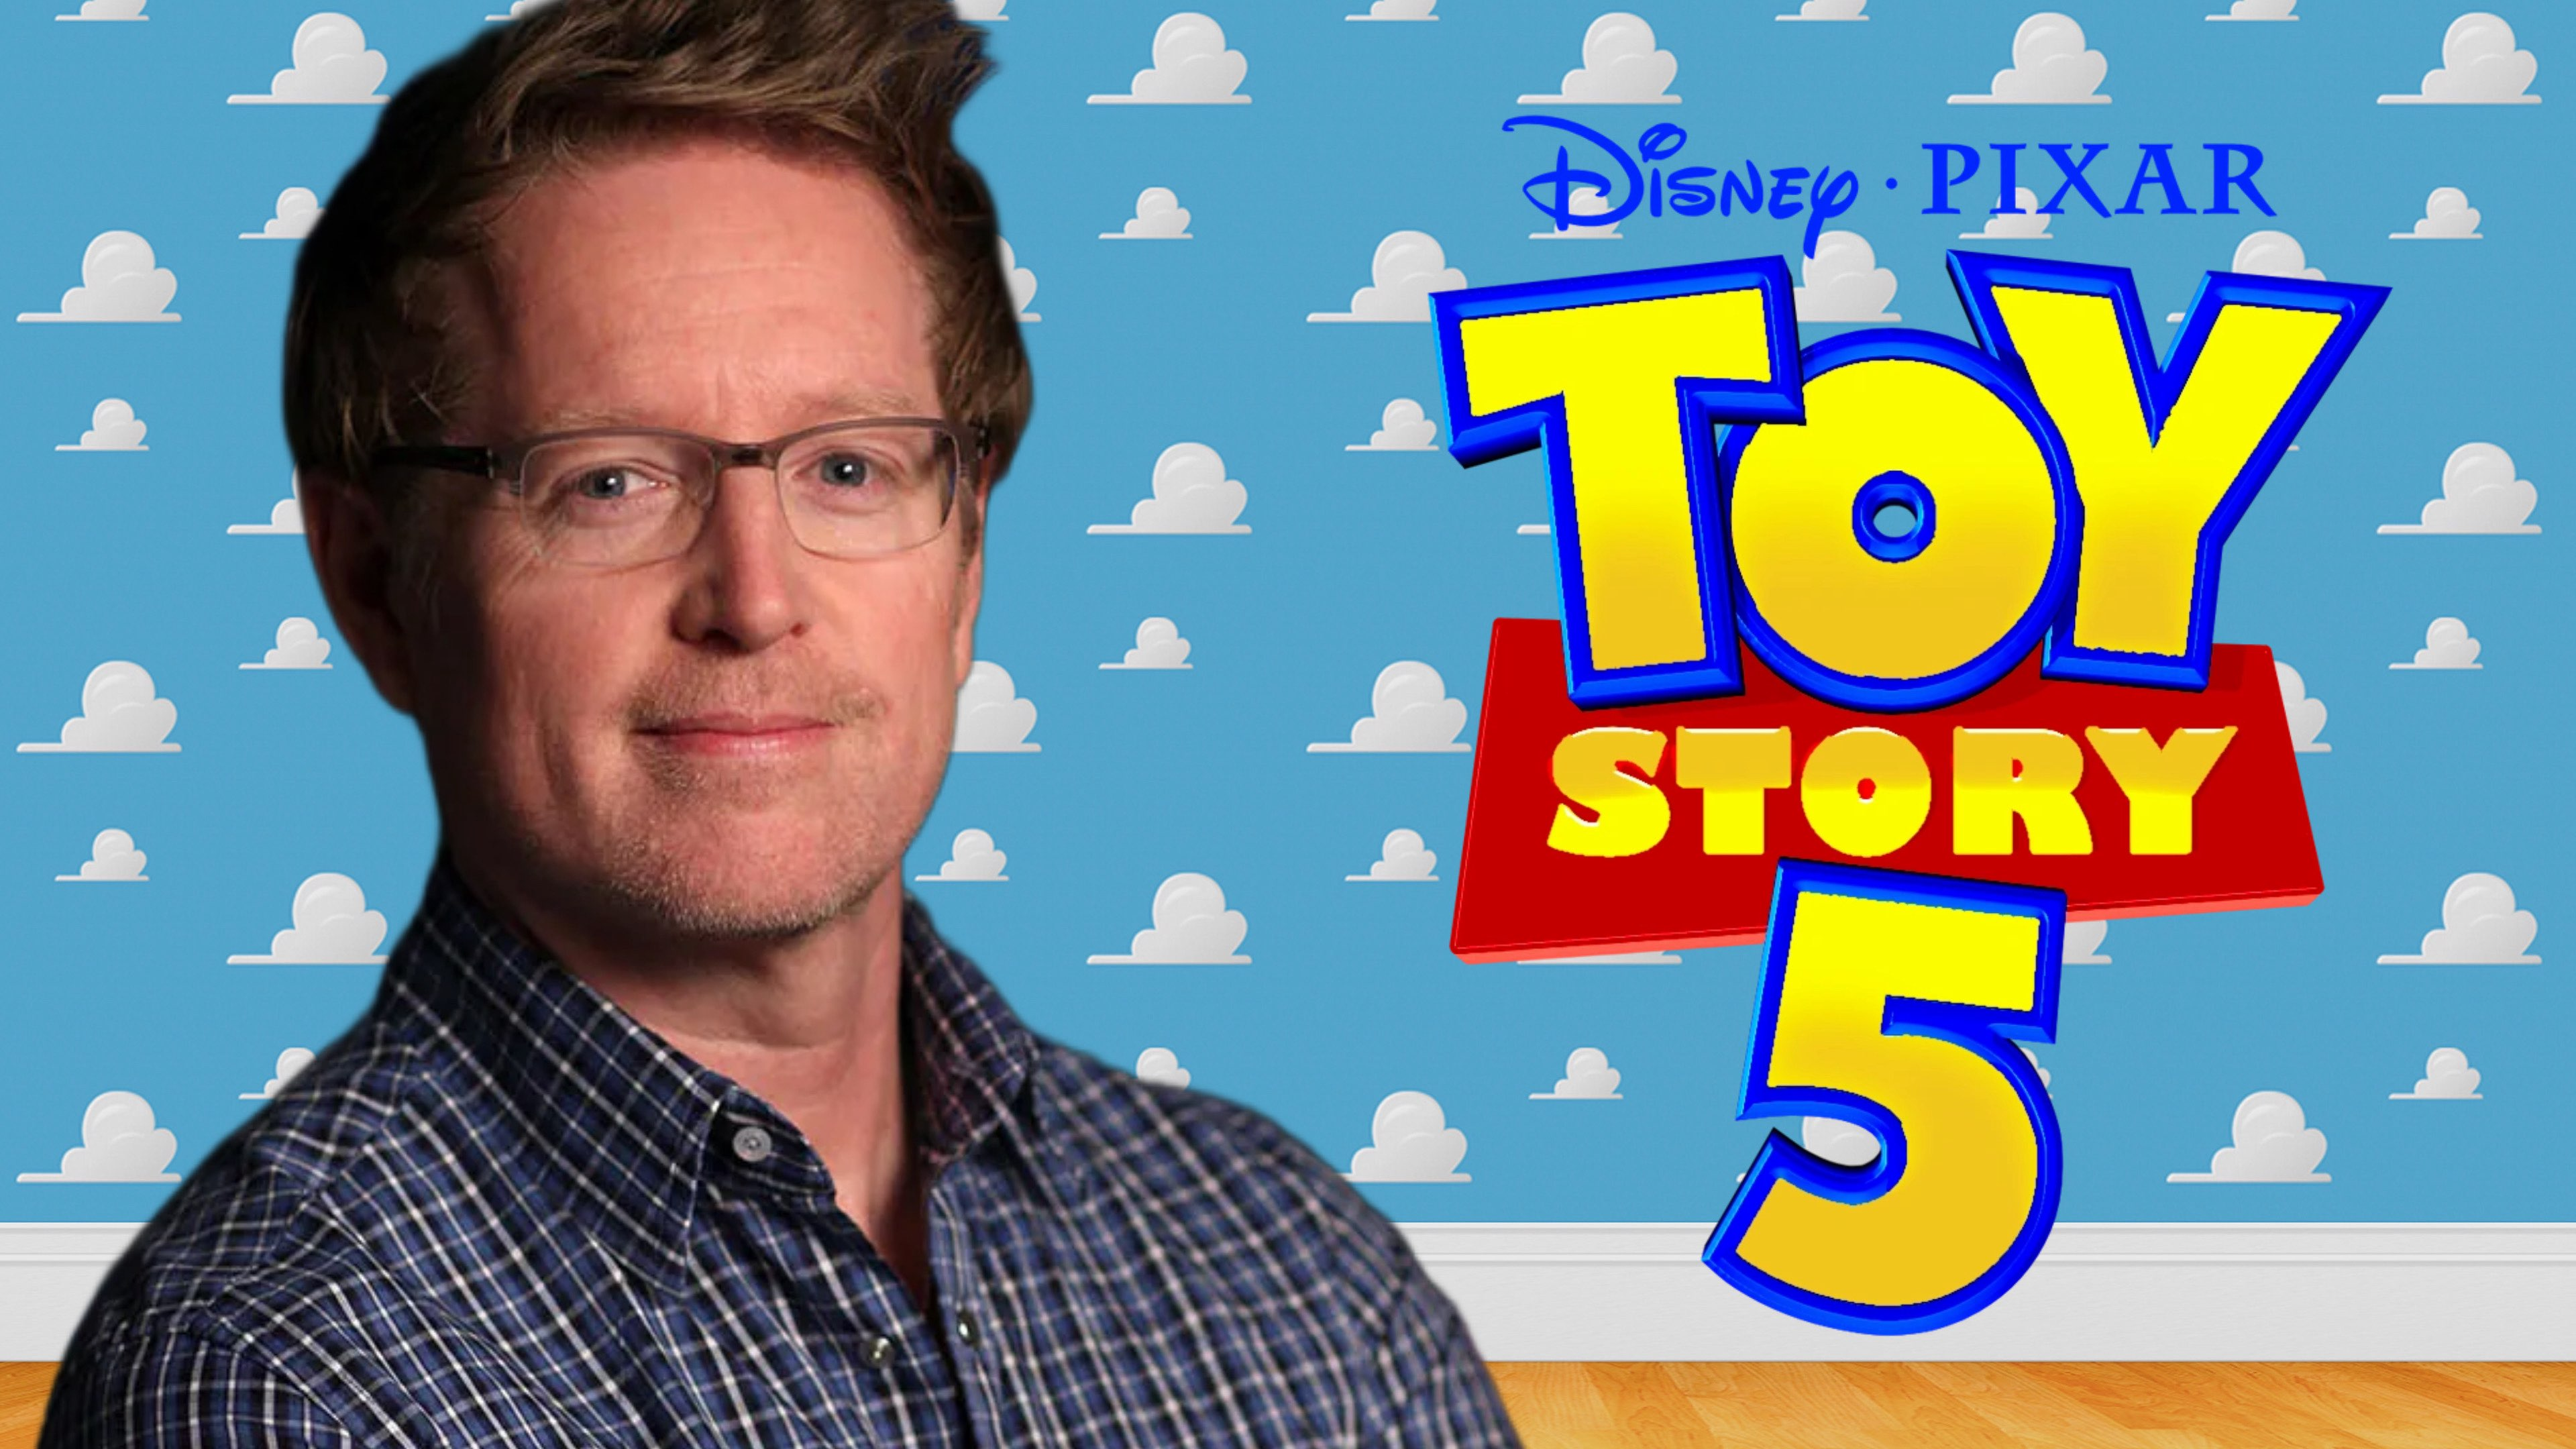 'WALL-E' Director Andrew Stanton to Direct 'Toy Story 5' - Daily Disney News